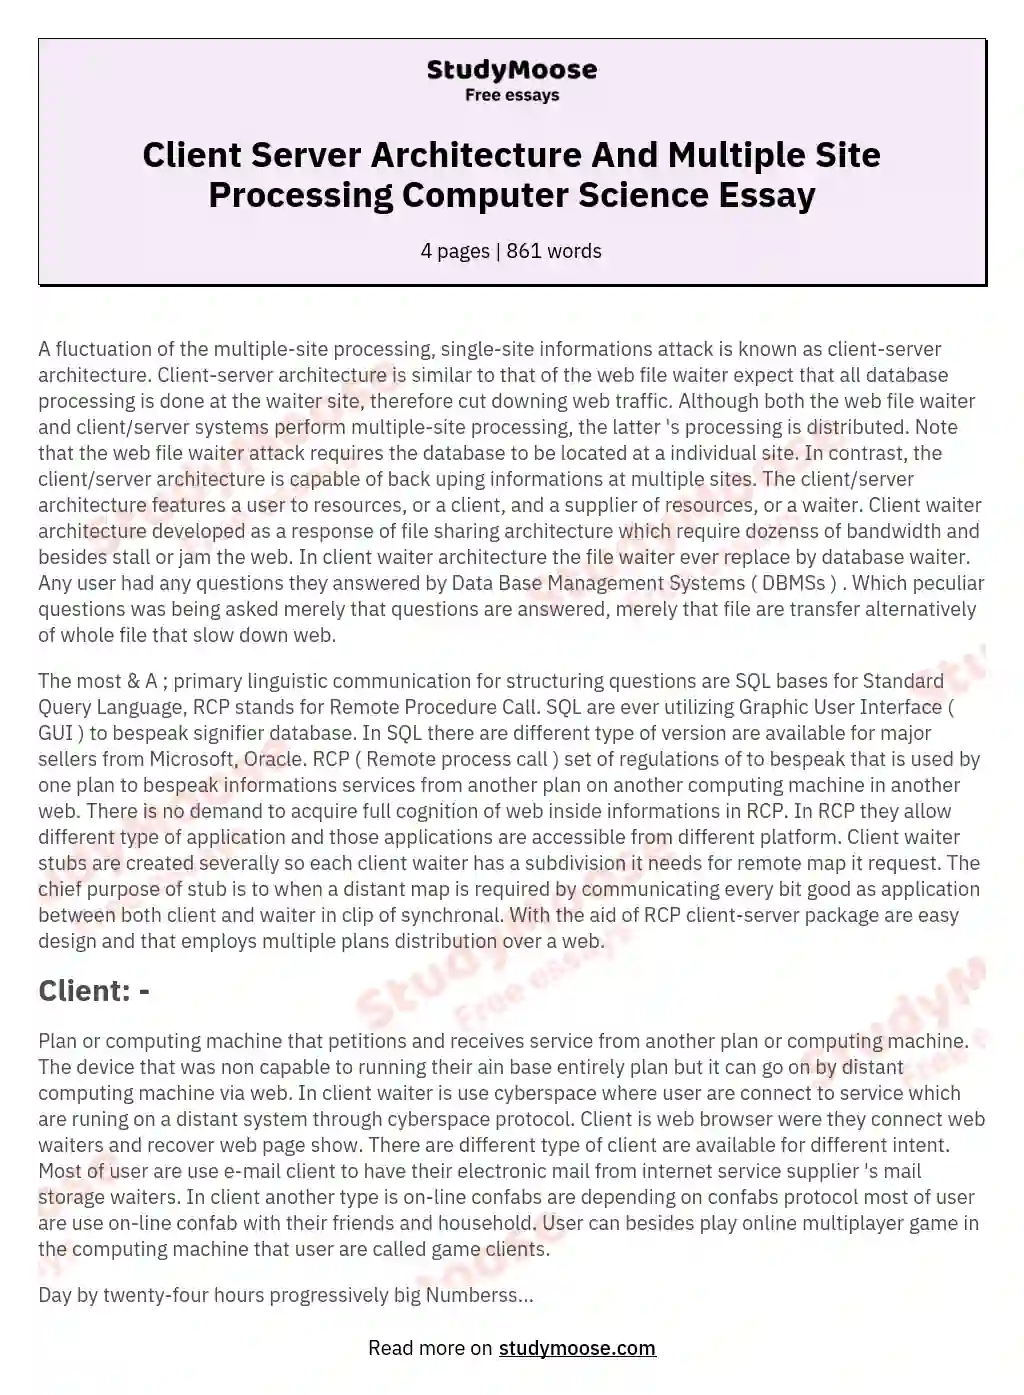 Client Server Architecture And Multiple Site Processing Computer Science Essay